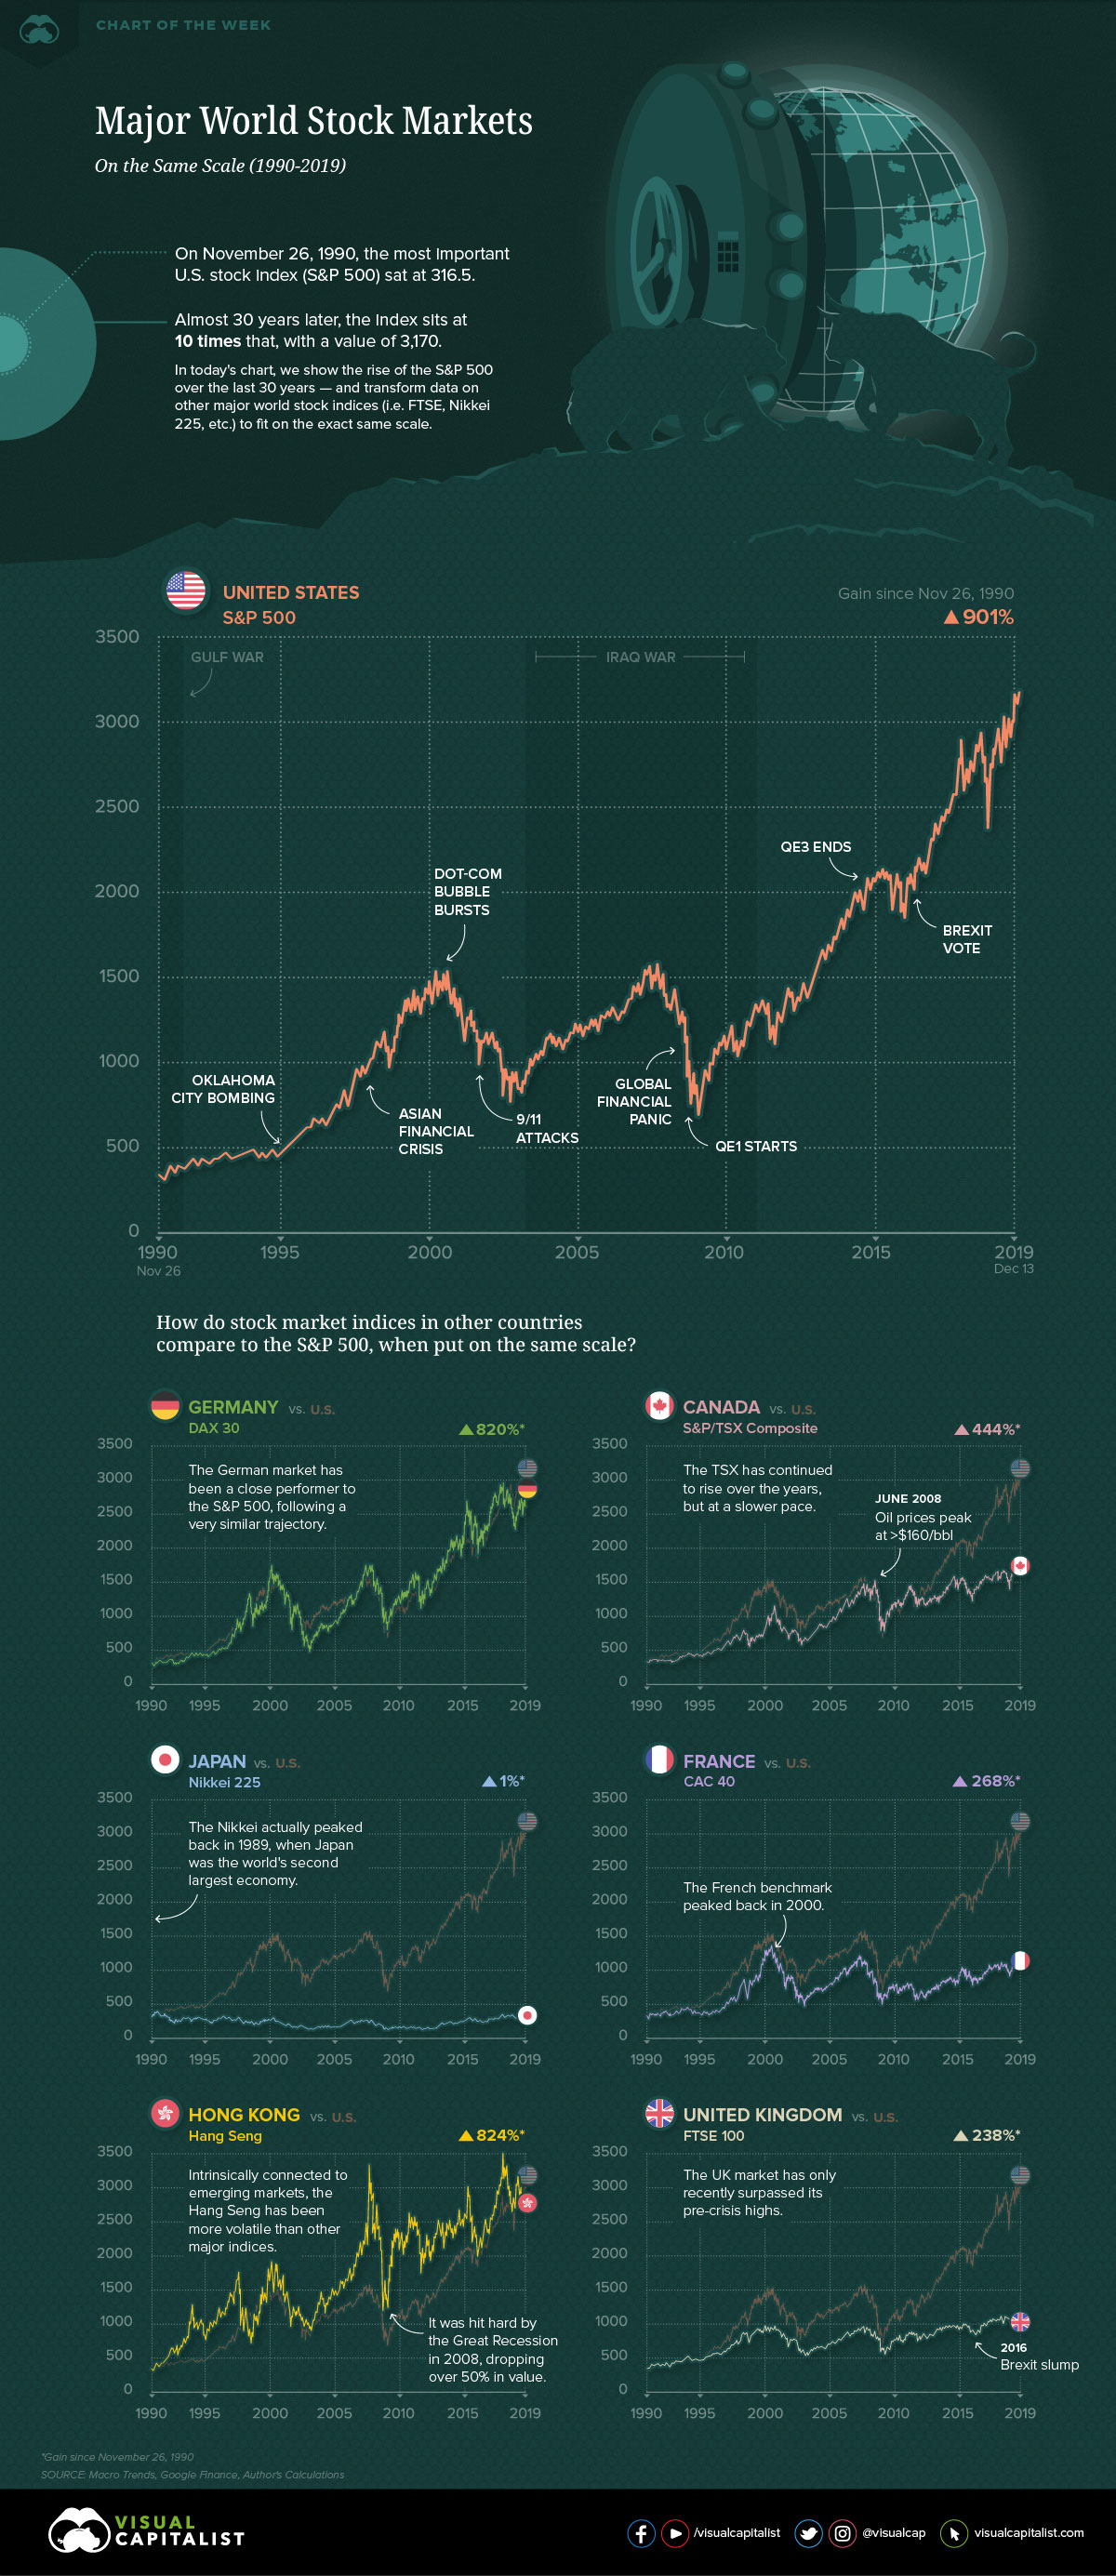 Major stock markets compared to the S&P 500